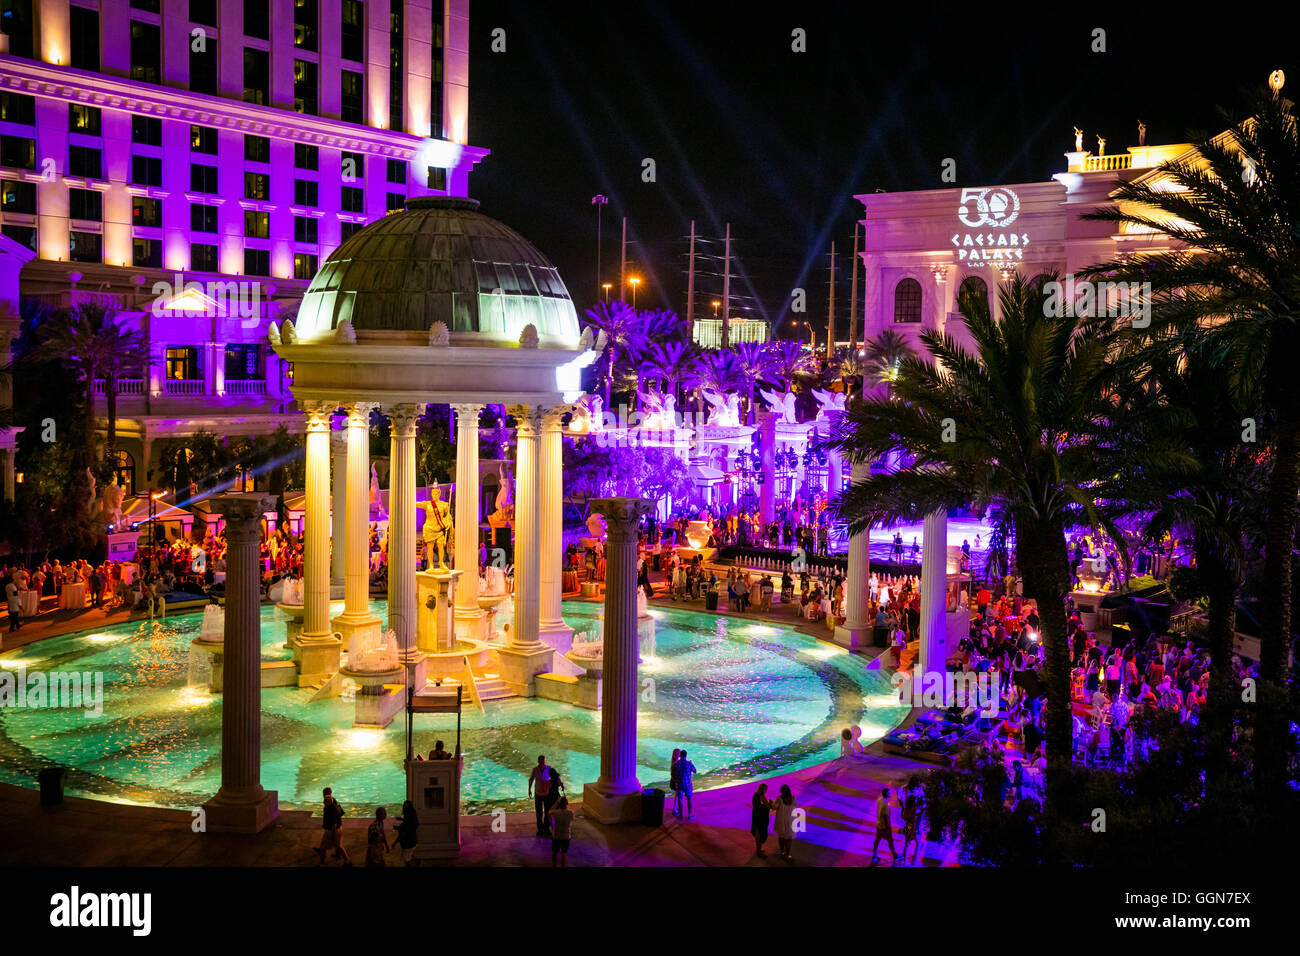 LAS VEGAS, NV - August 5, 2016: ***HOUSE COVERAGE*** Atmosphere pictured as  Caesars Palace celebrates it's 50th anniversary with a pool party  celebration hosted by Gordon Ramsay at Garden of the Gods